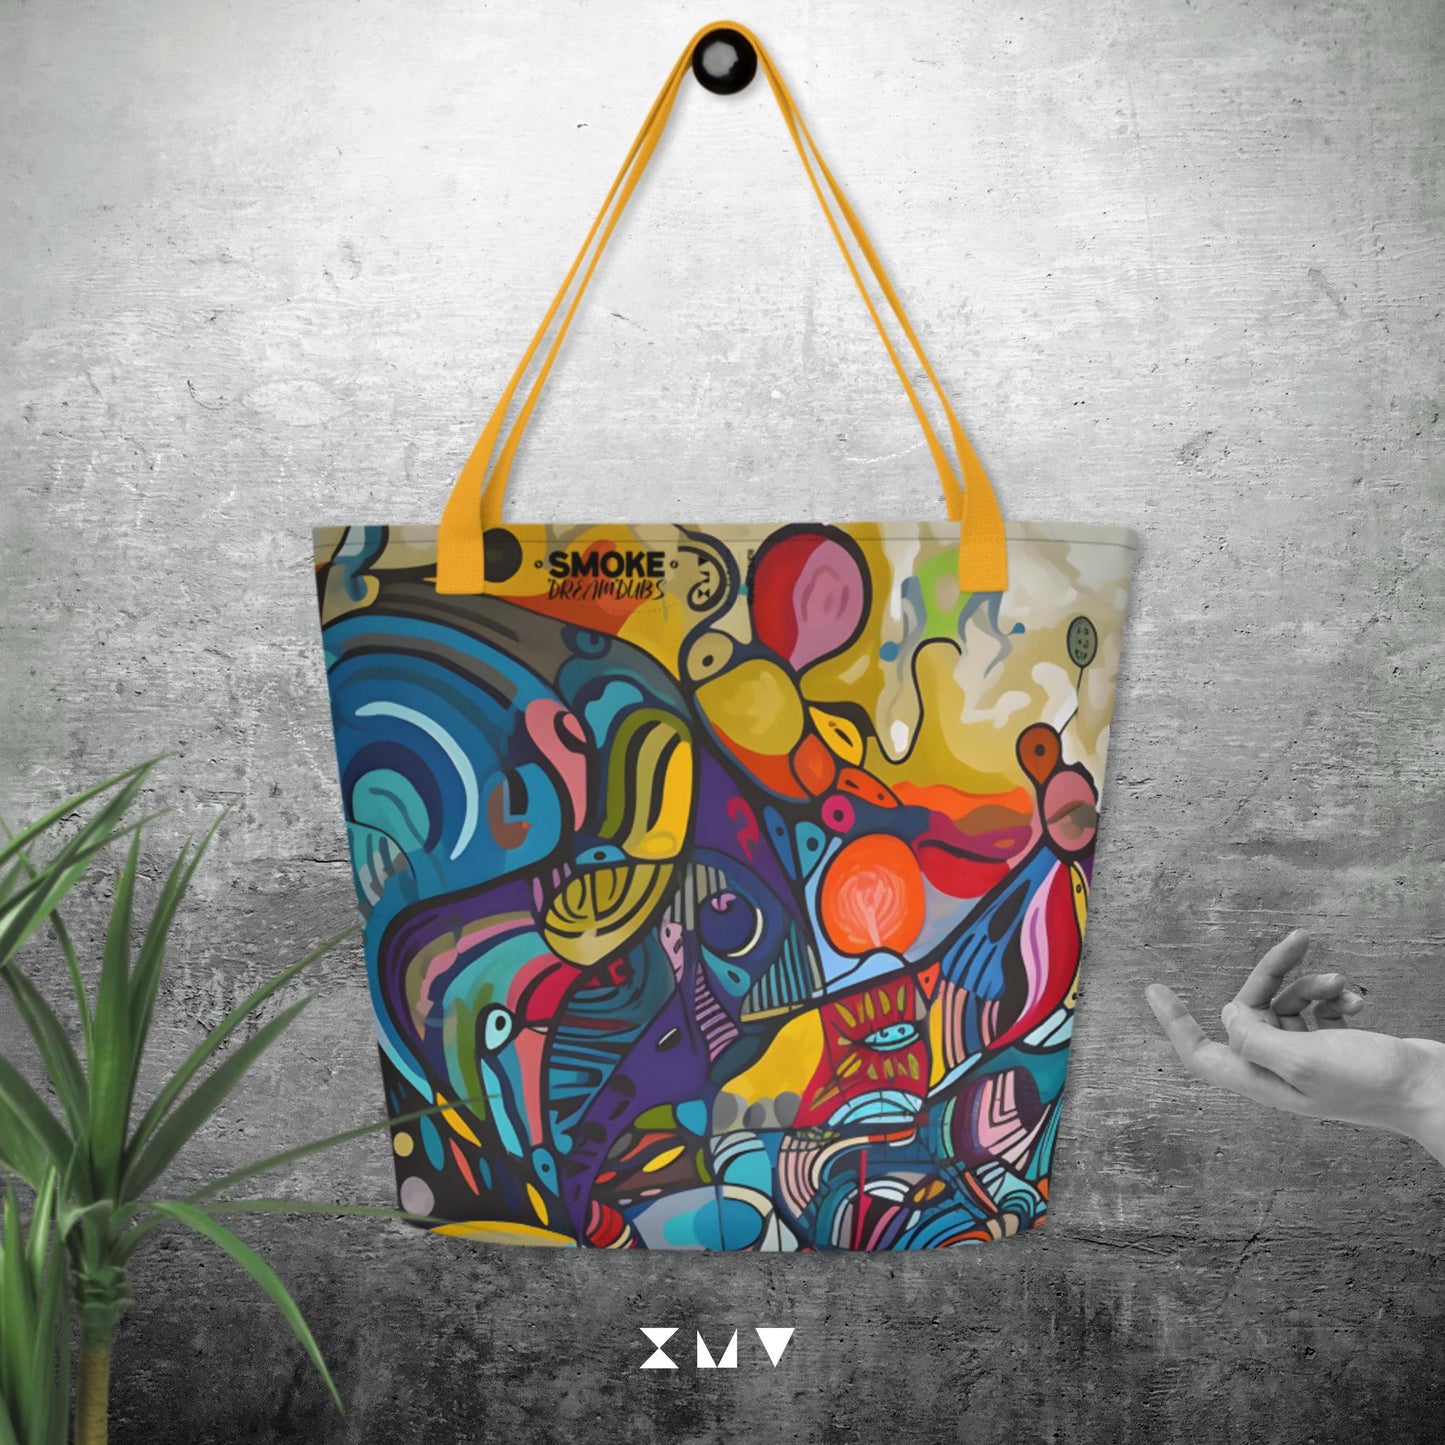 Abstractical Bag V1 by Demian Barrios - Large Tote Bag